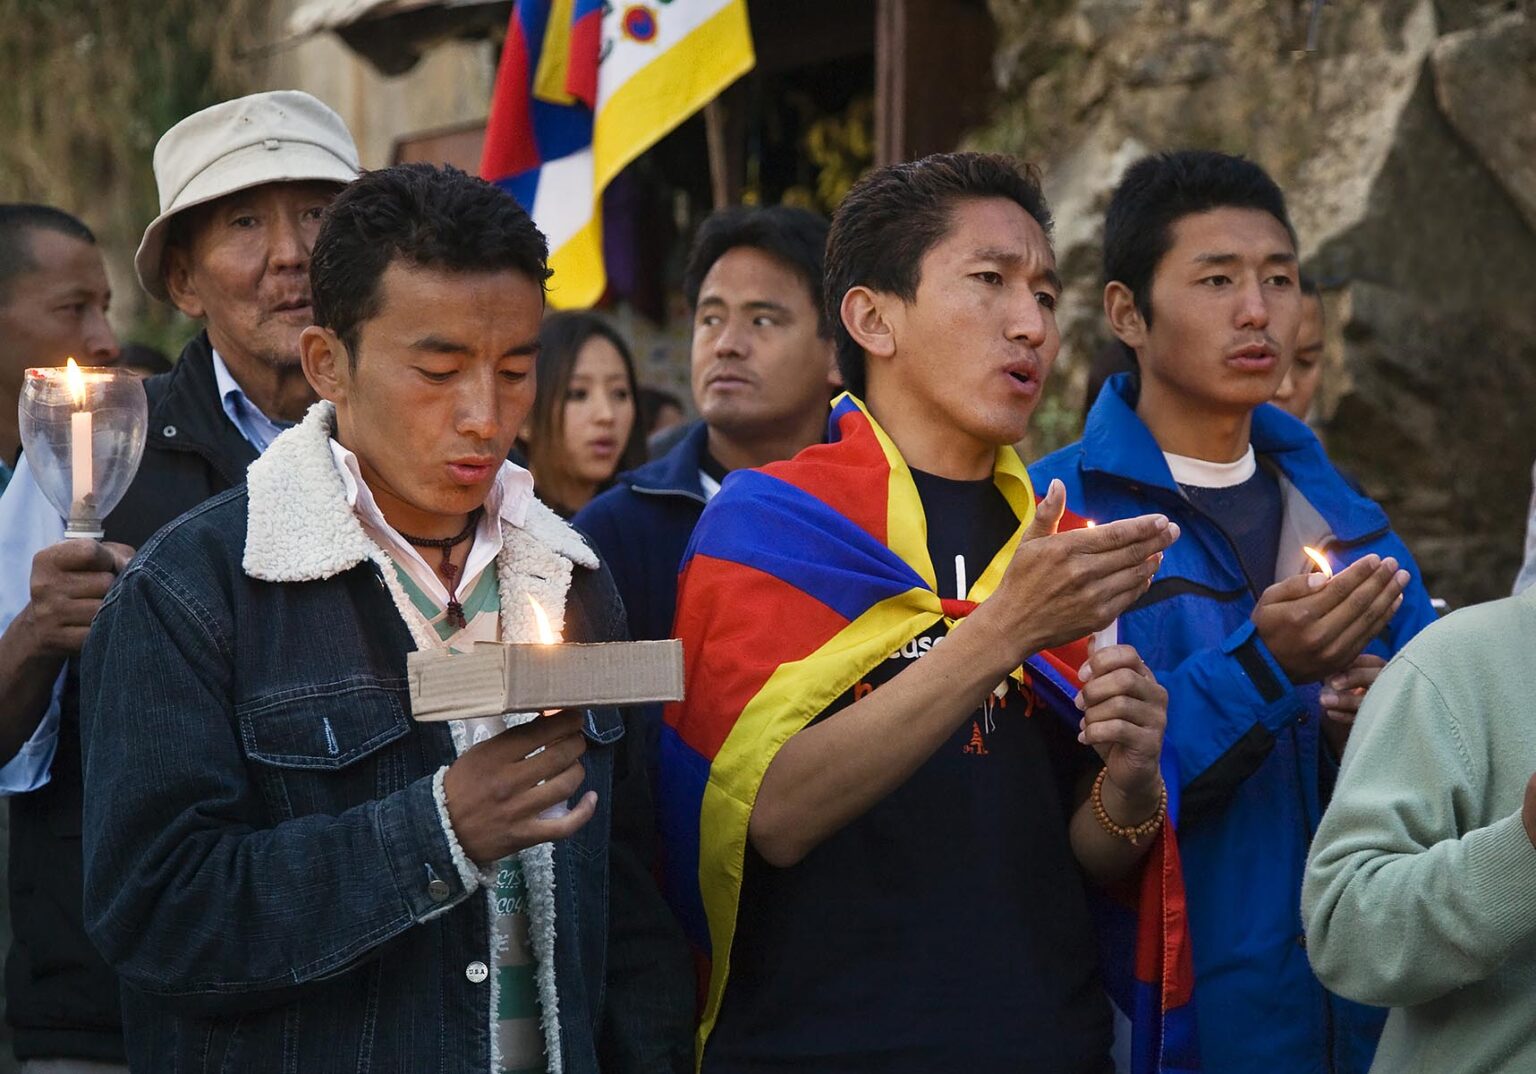 TIBETAN youth march in protest of the Chinese human rights abuses in Tibet on the streets of MCLEOD GANJ - DHARAMSALA, INDIA